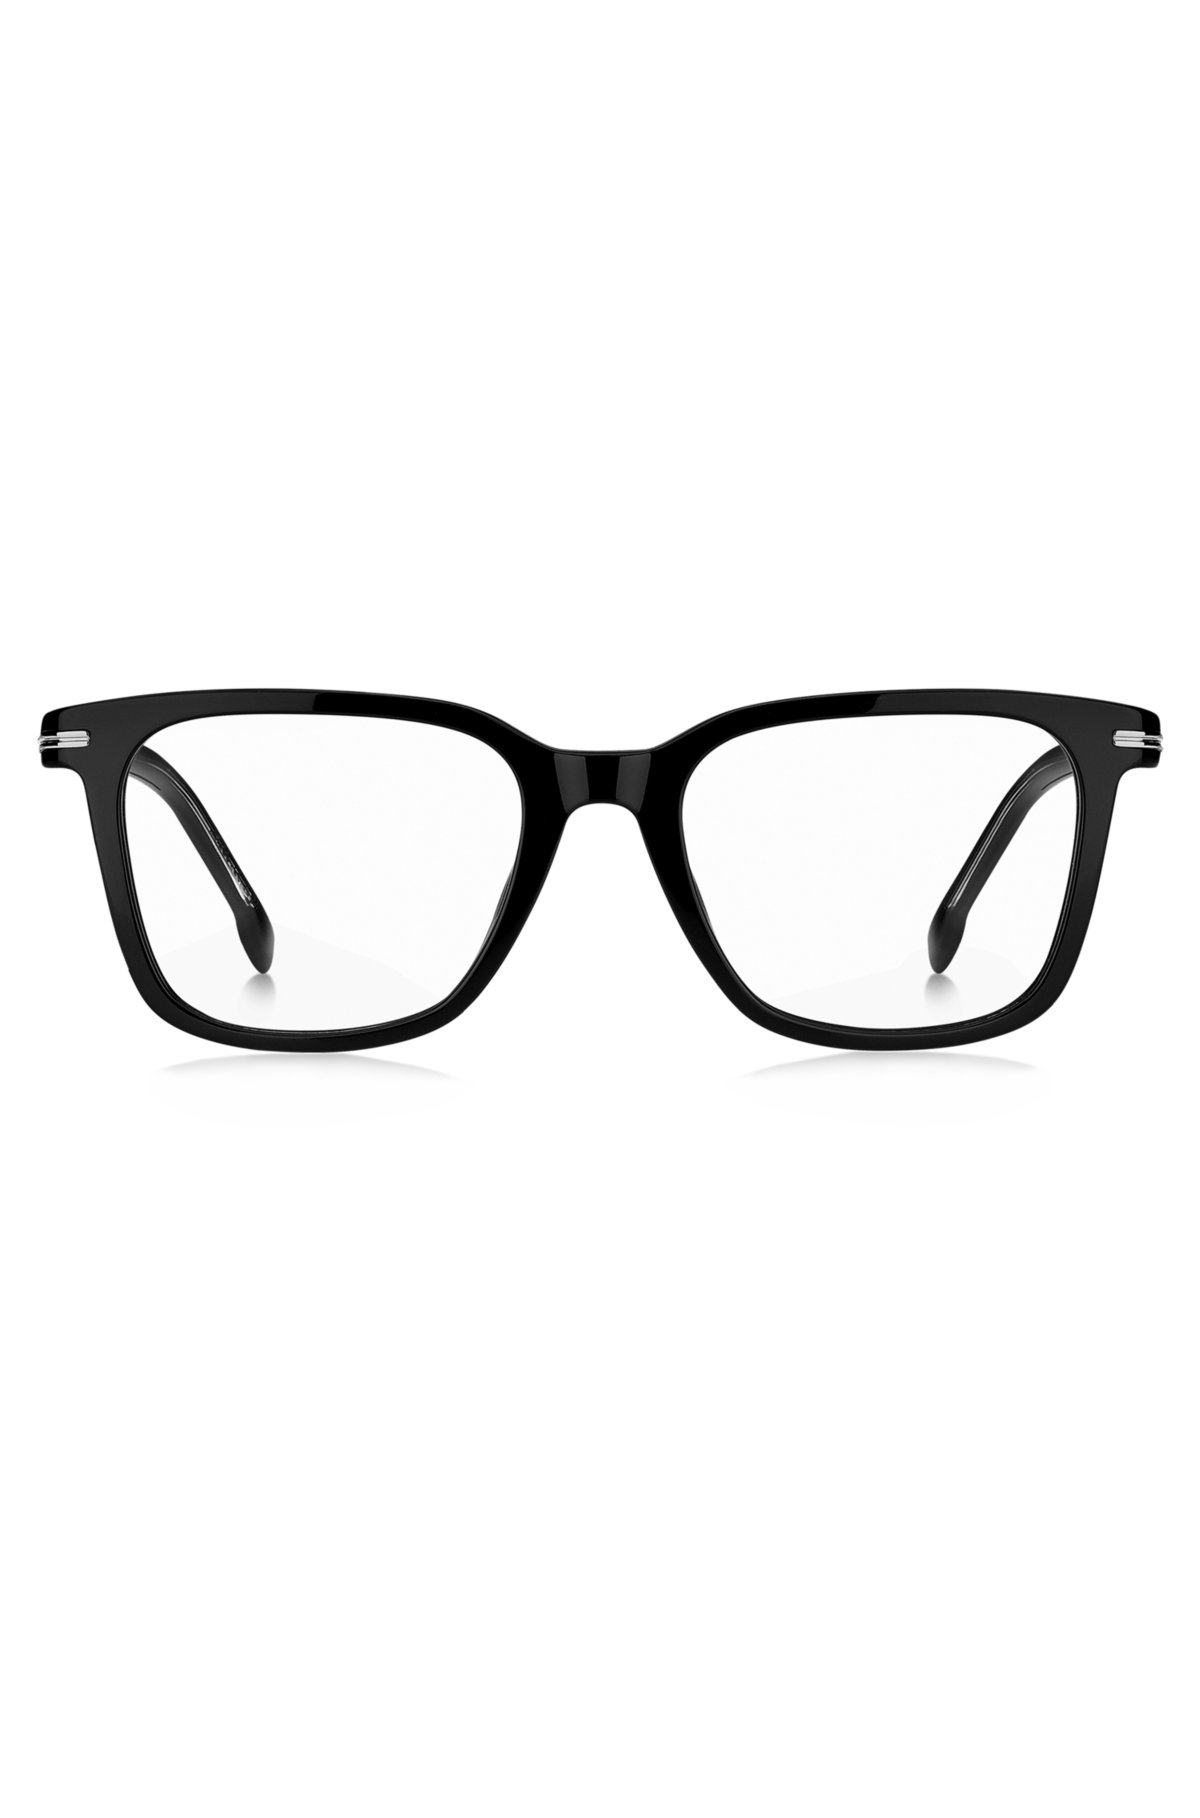 BOSS - Black-acetate optical frames with signature silver-tone detail